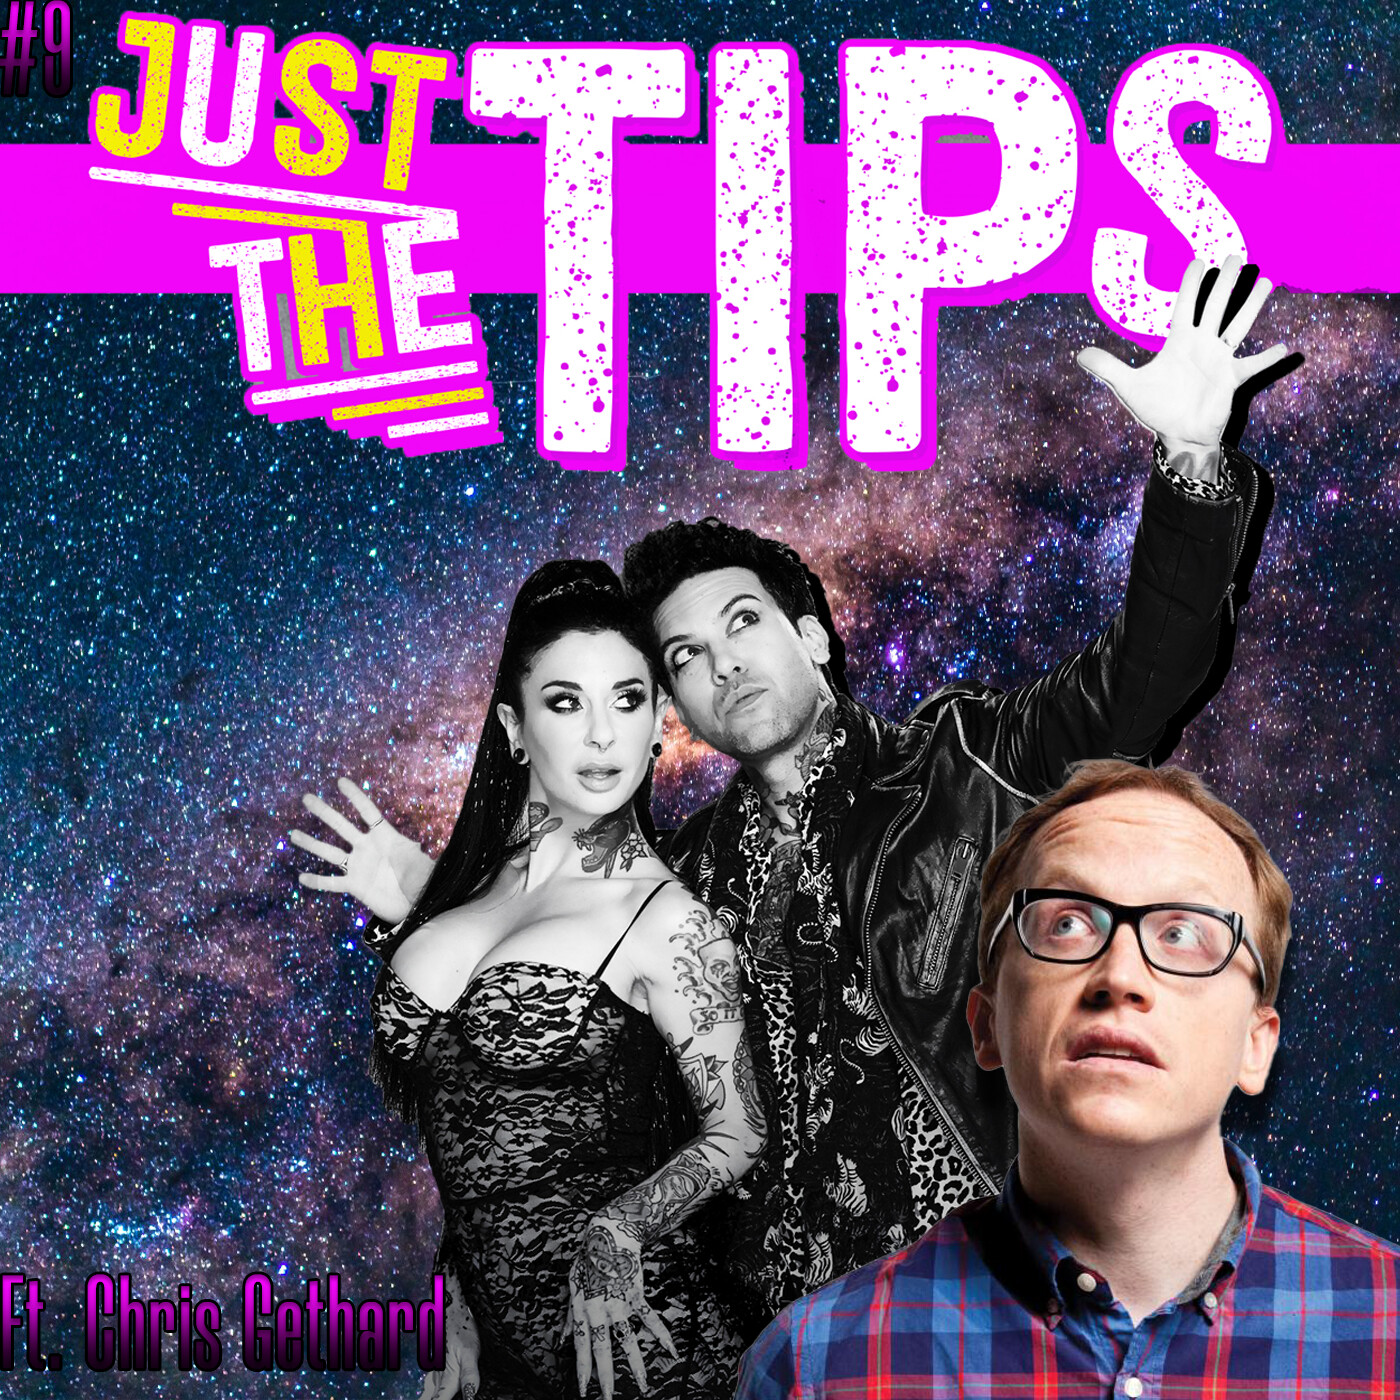 First Times and Freaks Ft. Chris Gethard | Just The Tips w/ Joanna Angel and Small Hands #9